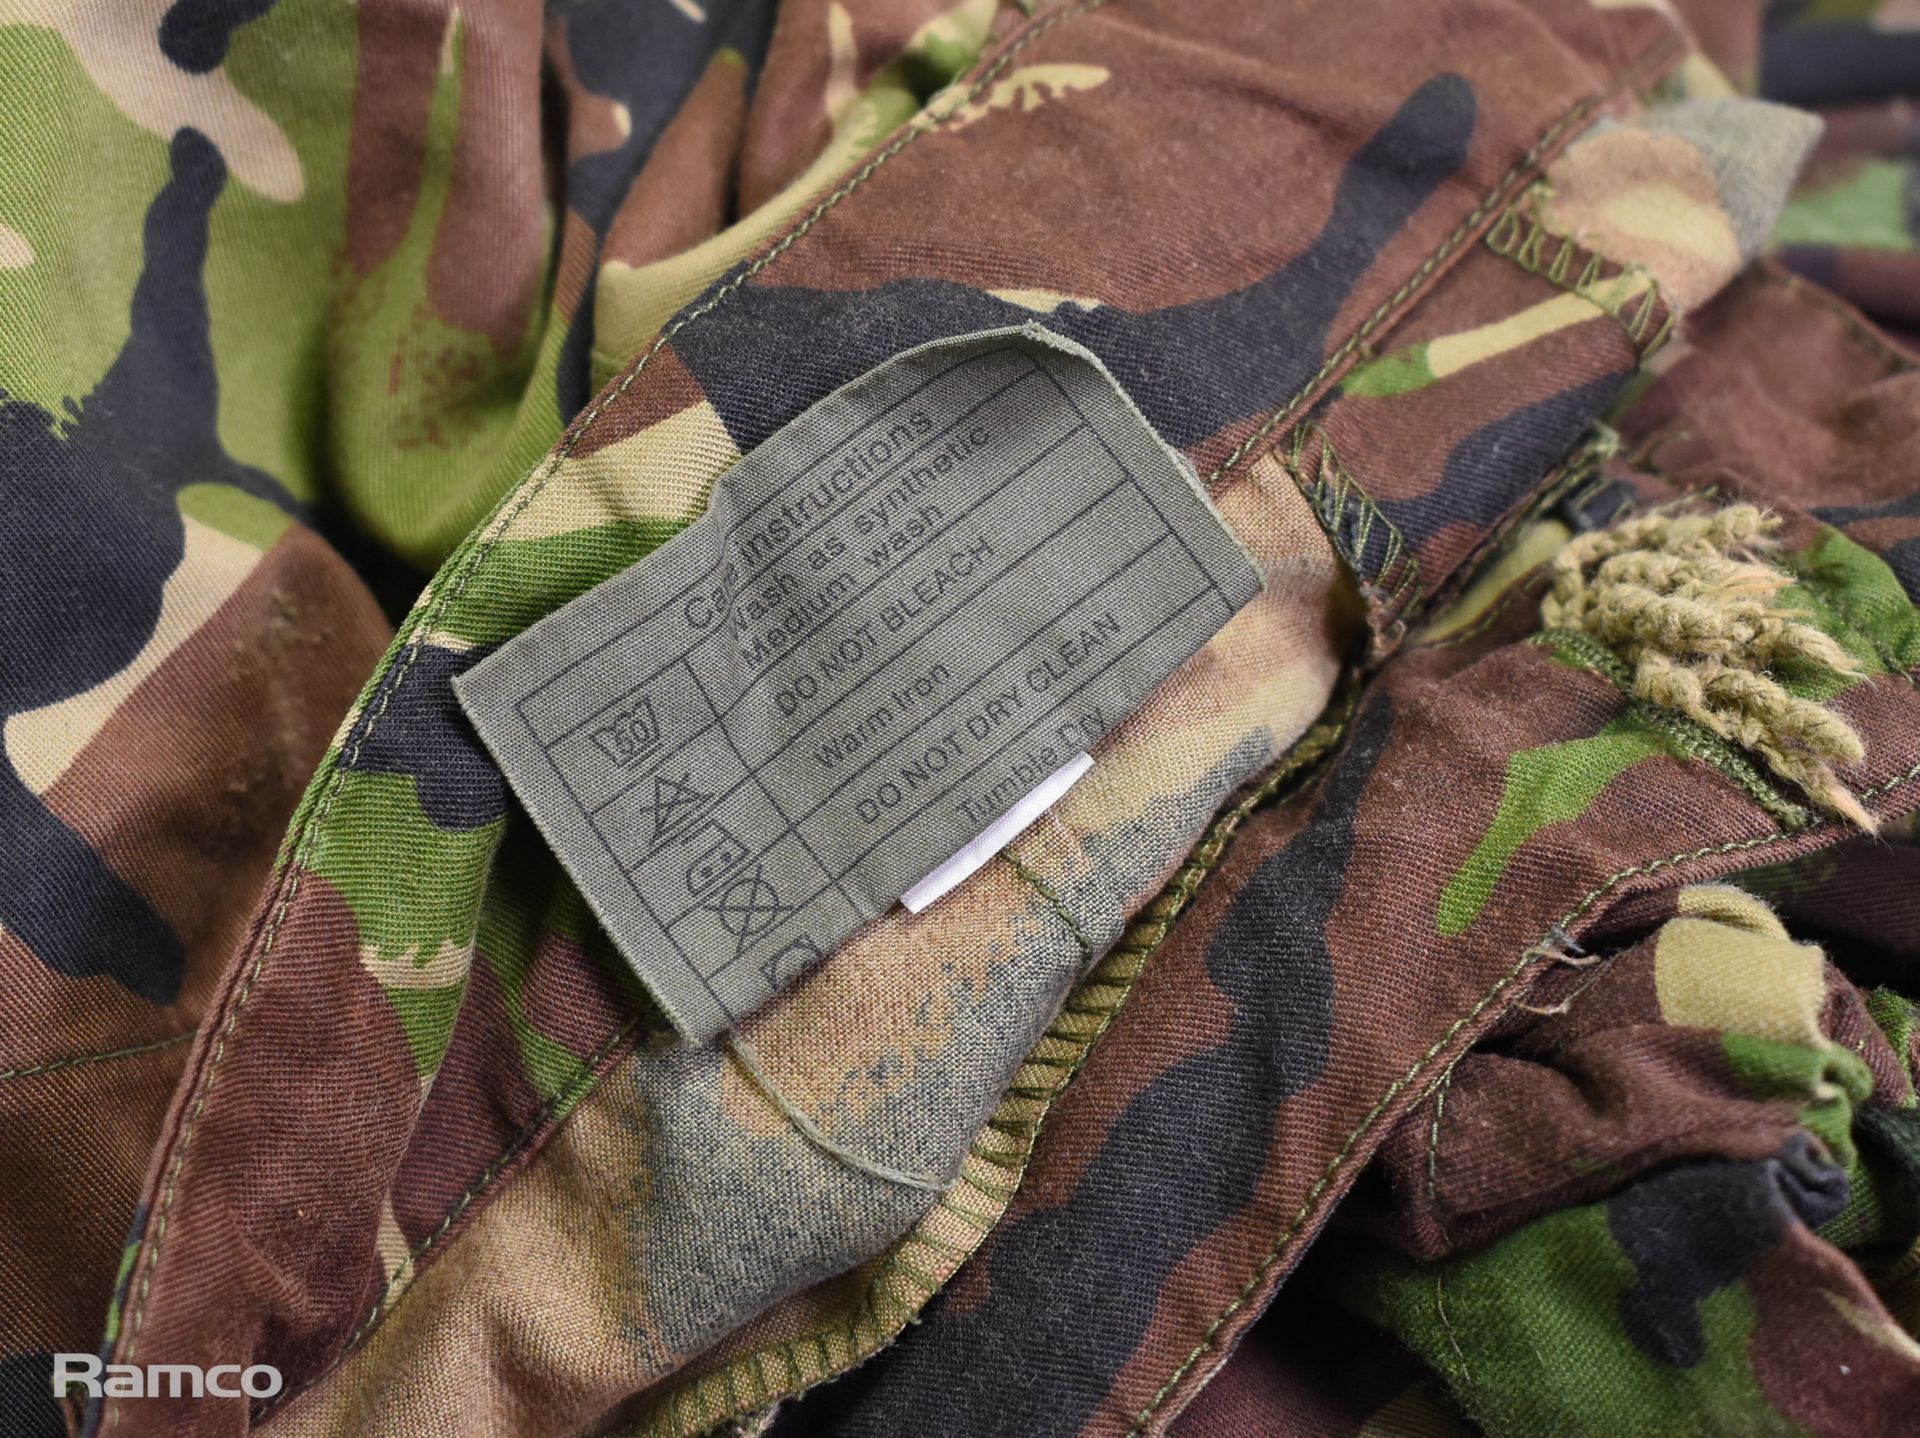 30x British Army combat woodland trousers - mixed grades and sizes - Image 8 of 10